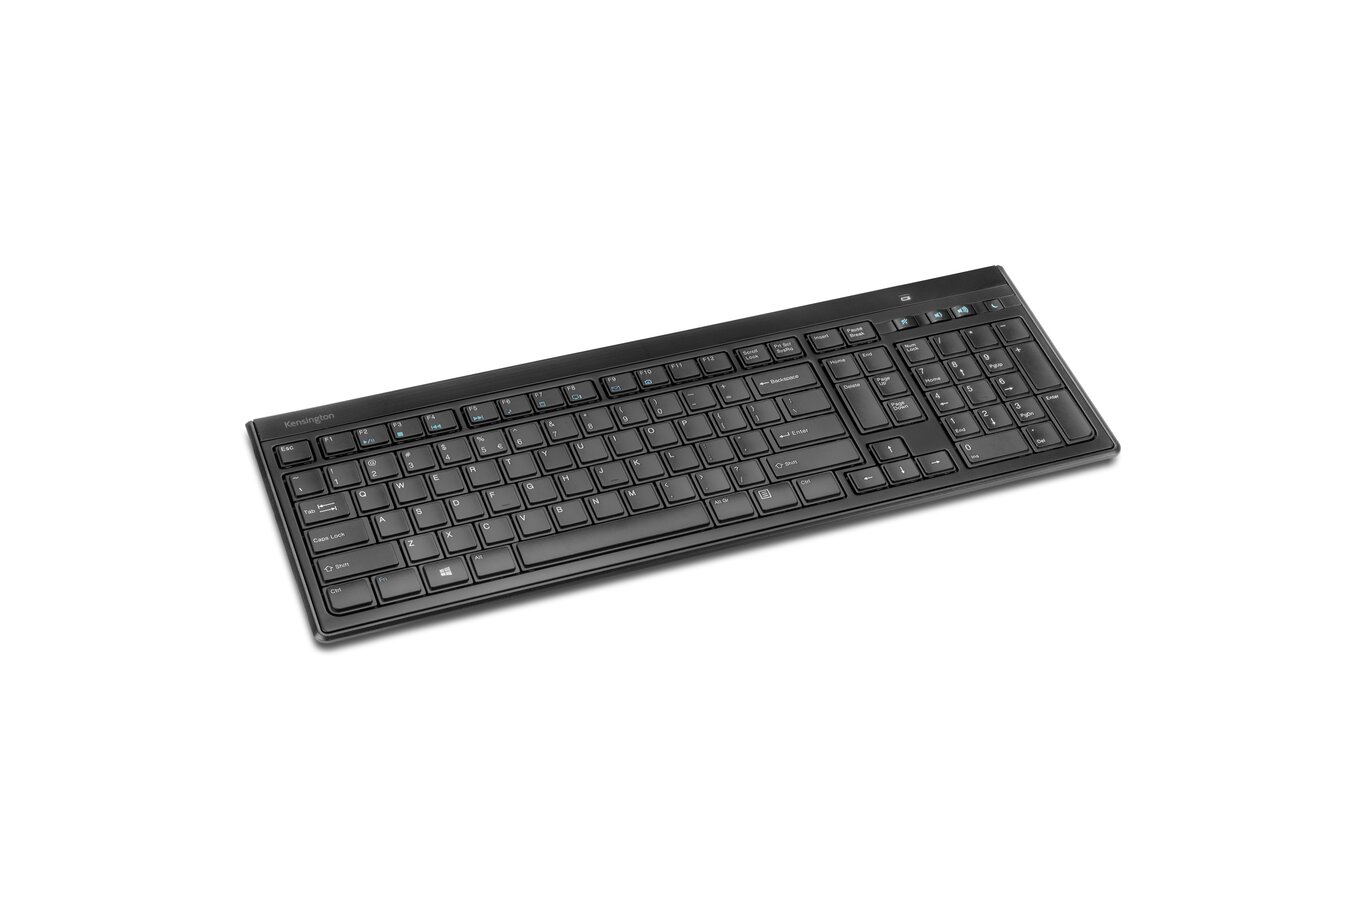 Kensington Wired USB 3.0 Keyboard - Advance Fit Quiet Full-Size Slim  Keyboard with AZERTY French Layout for Windows and Mac, Plug & Play  (K72357FR)